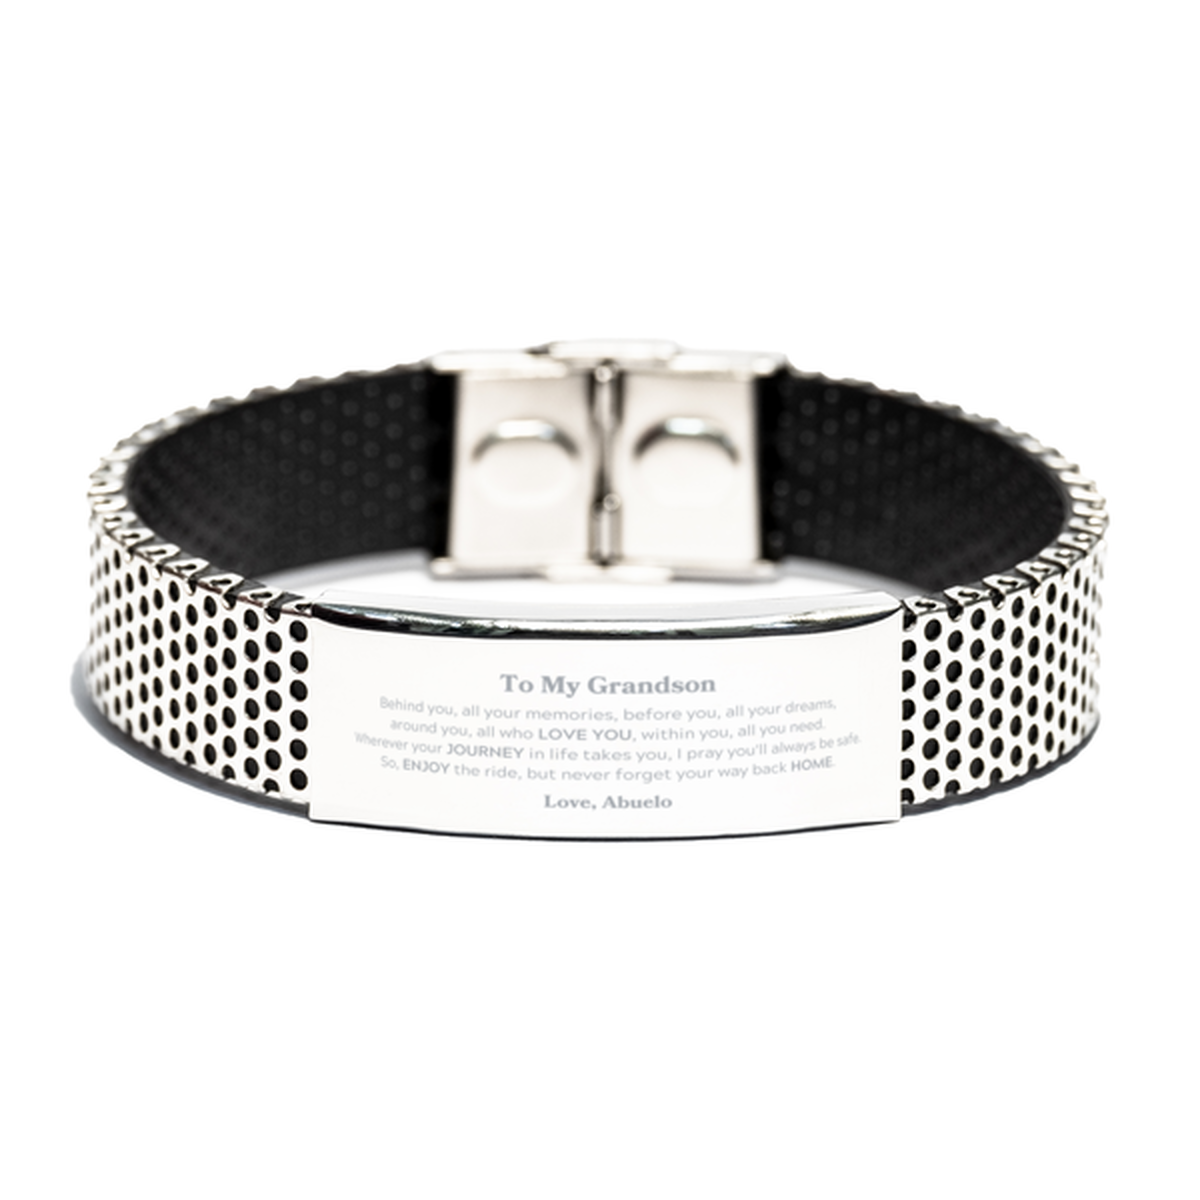 To My Grandson Graduation Gifts from Abuelo, Grandson Stainless Steel Bracelet Christmas Birthday Gifts for Grandson Behind you, all your memories, before you, all your dreams. Love, Abuelo